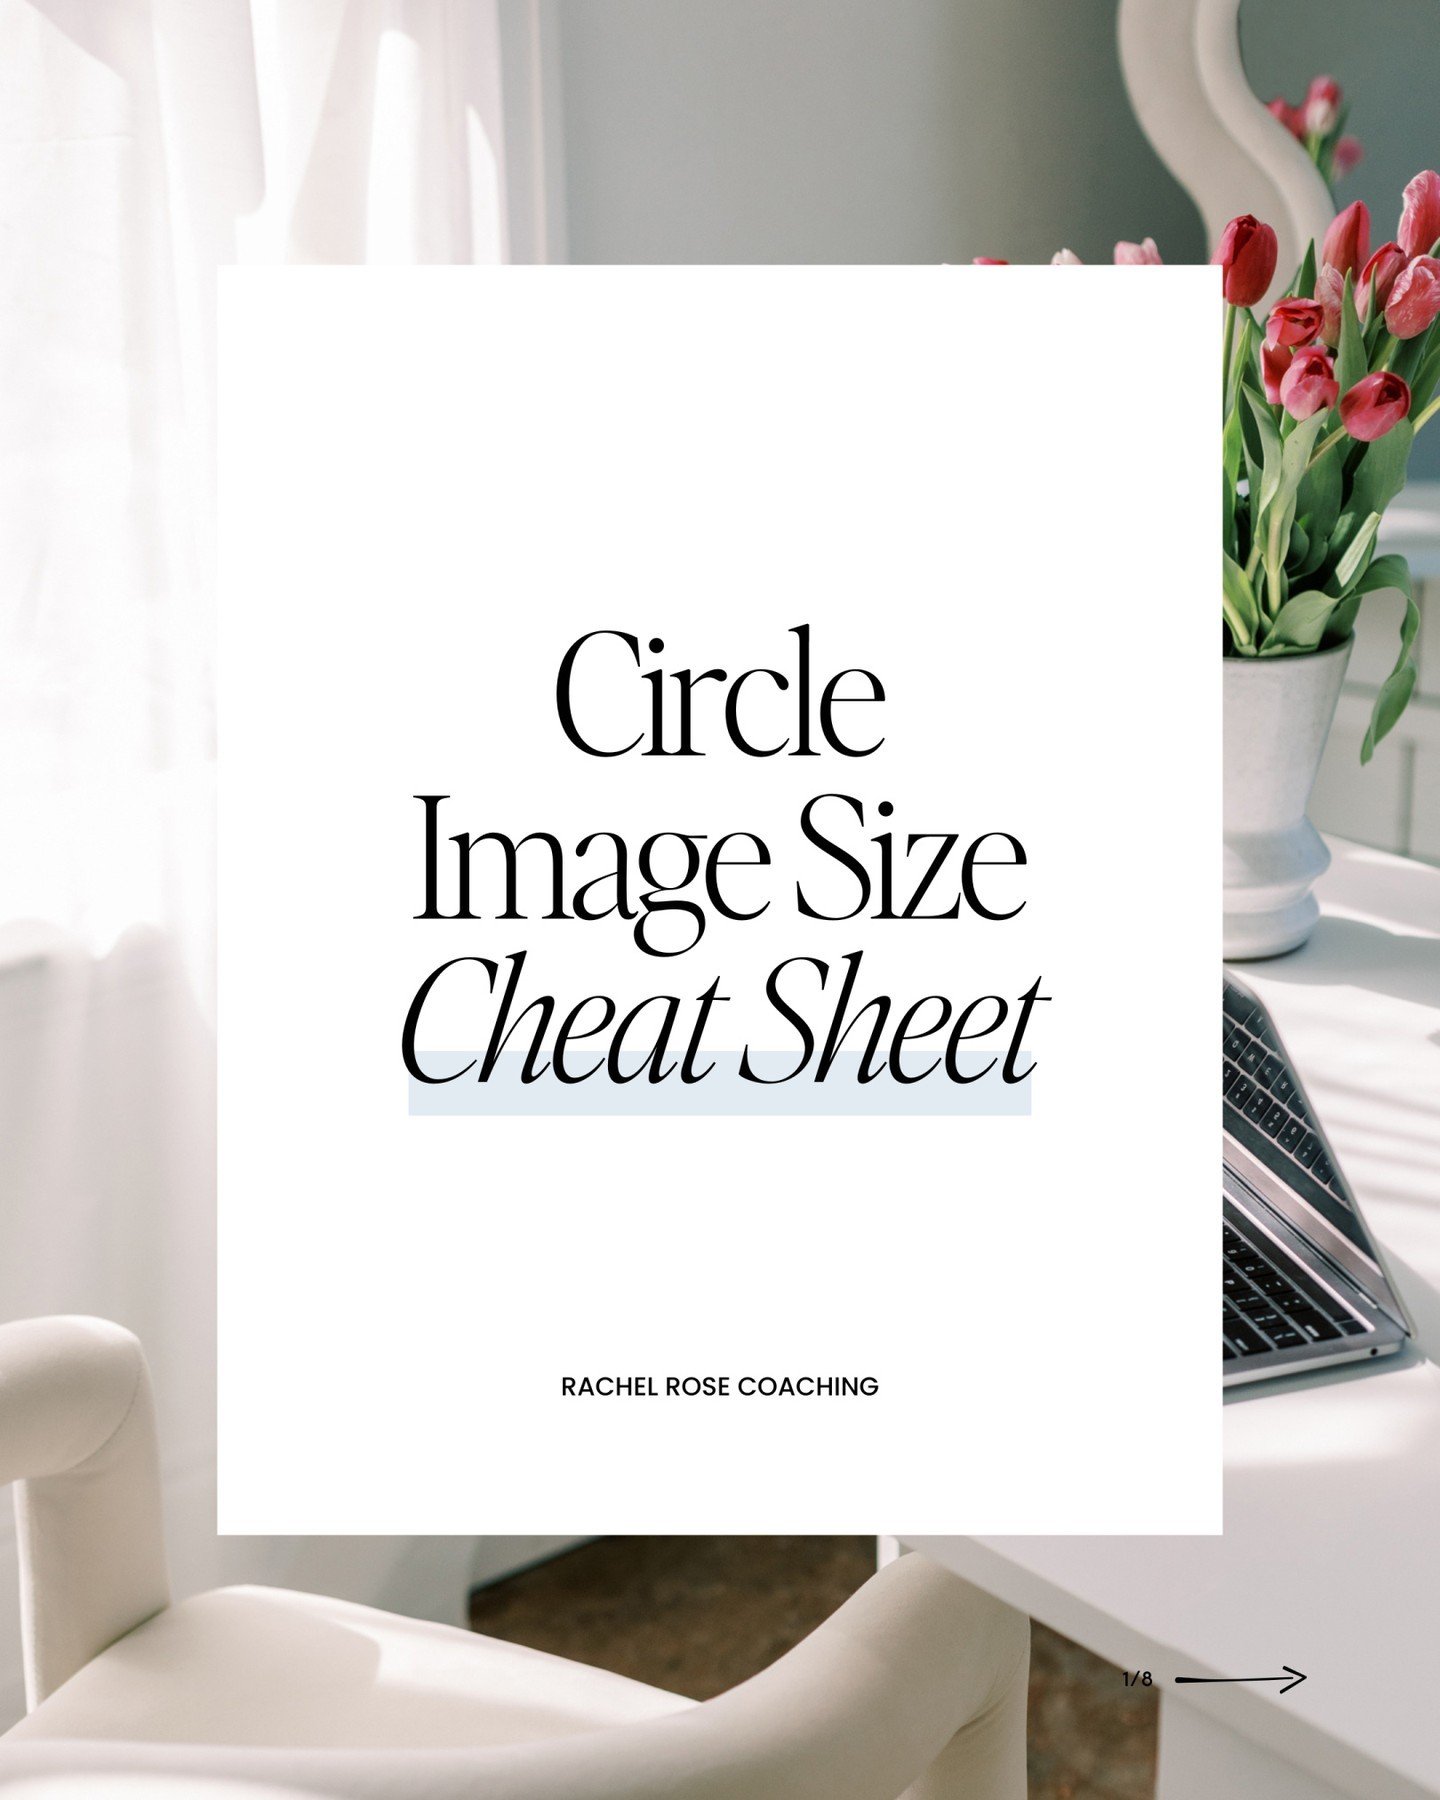 📐 Introducing the Circle Image Size Cheat Sheet! 🖼️

Designed specifically for designers, content creators, and anyone passionate about perfect visuals in their community, this cheat sheet is your essential guide to mastering image sizes. We unders